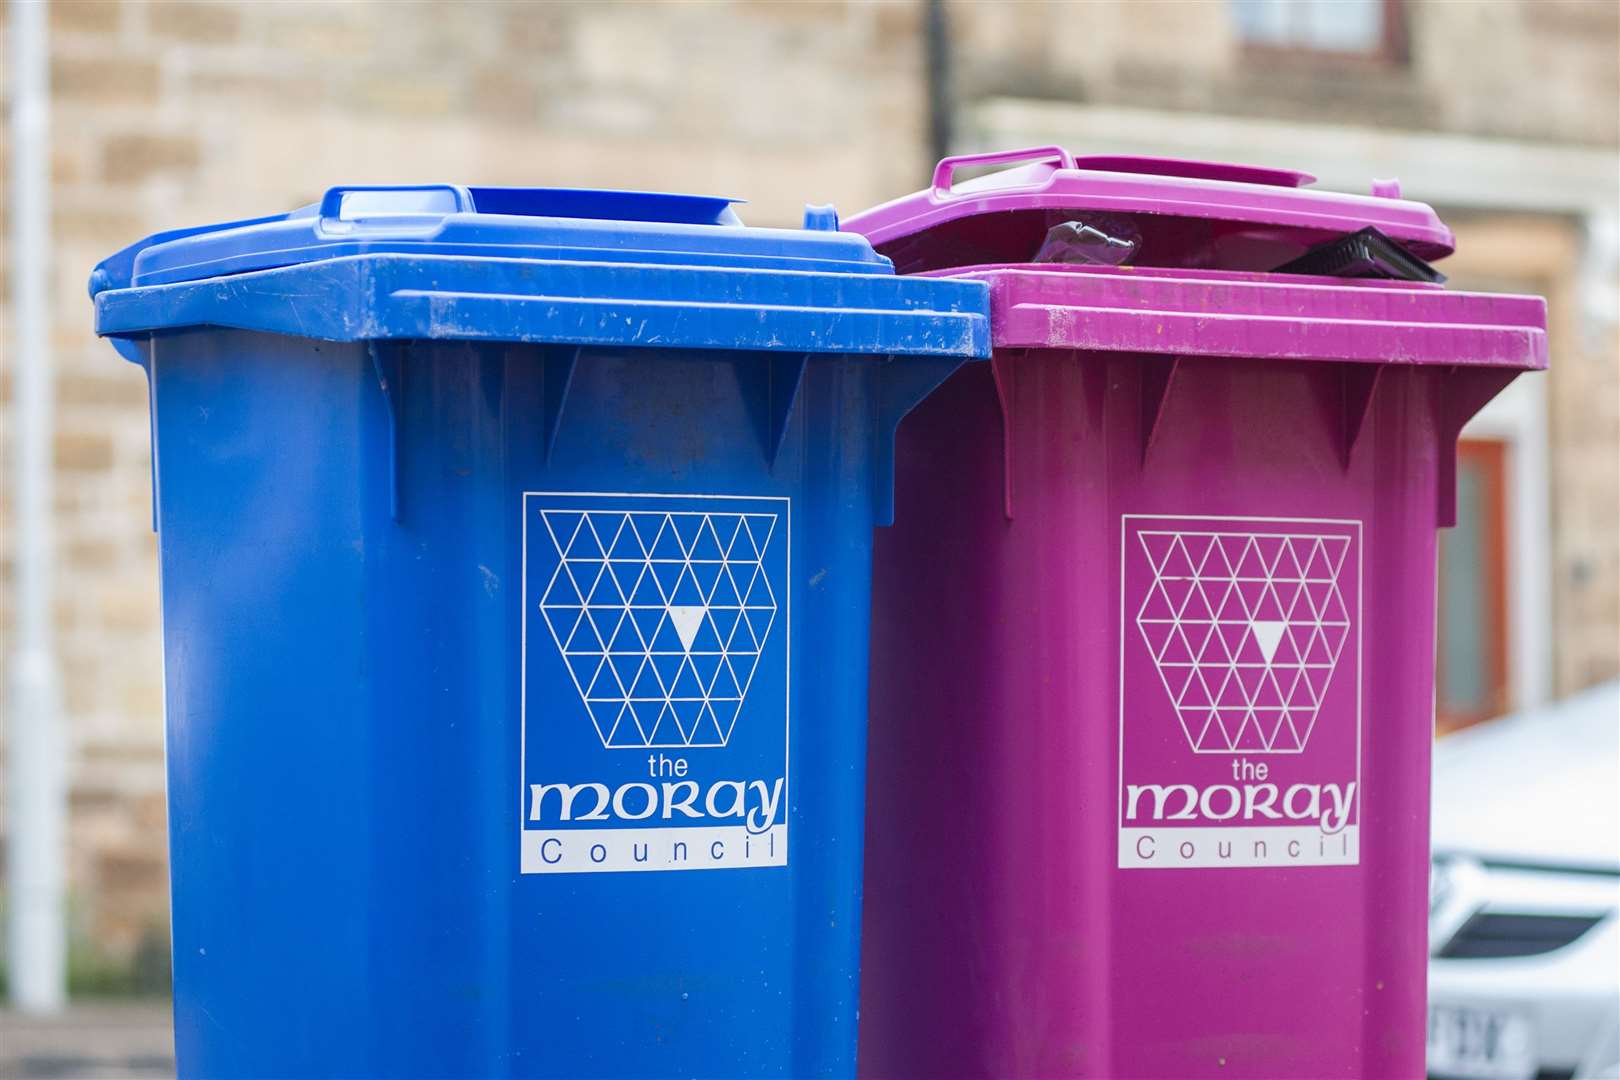 Moray councillors voted yesterday to delay a decision on making three-weekly recycling collections permanent. Picture: Daniel Forsyth.